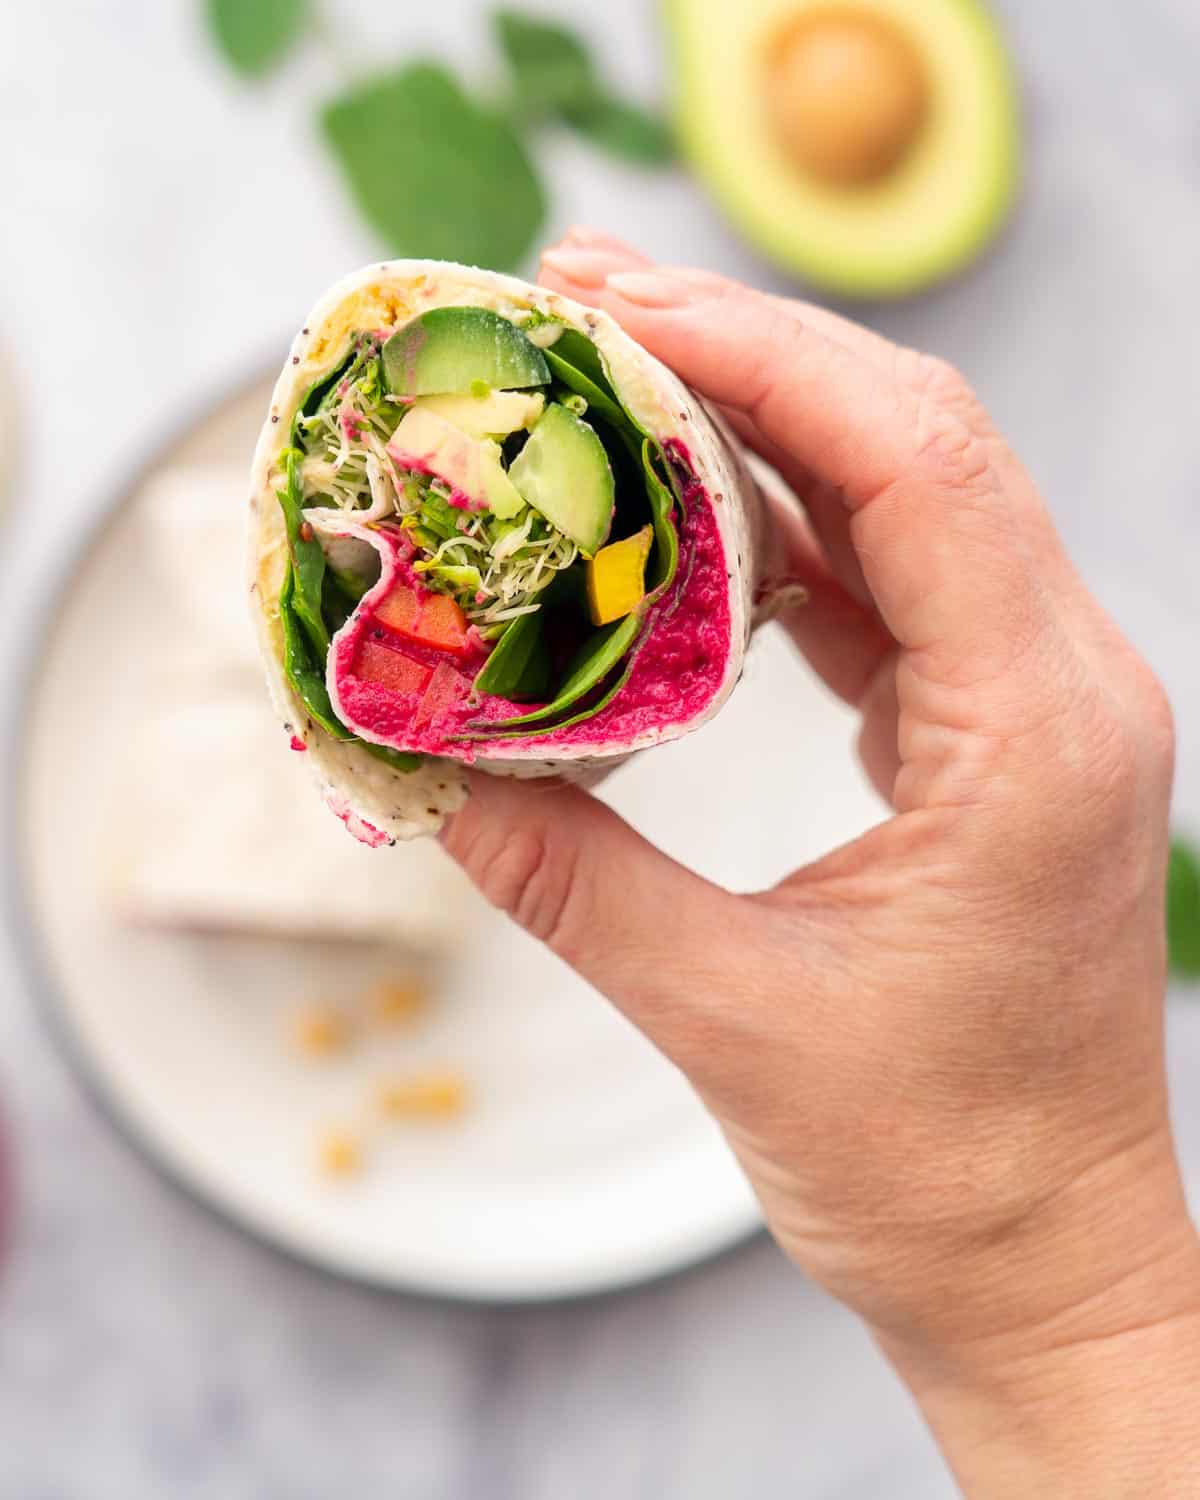 A wrap filled with colourful veggies being held up to the camera.